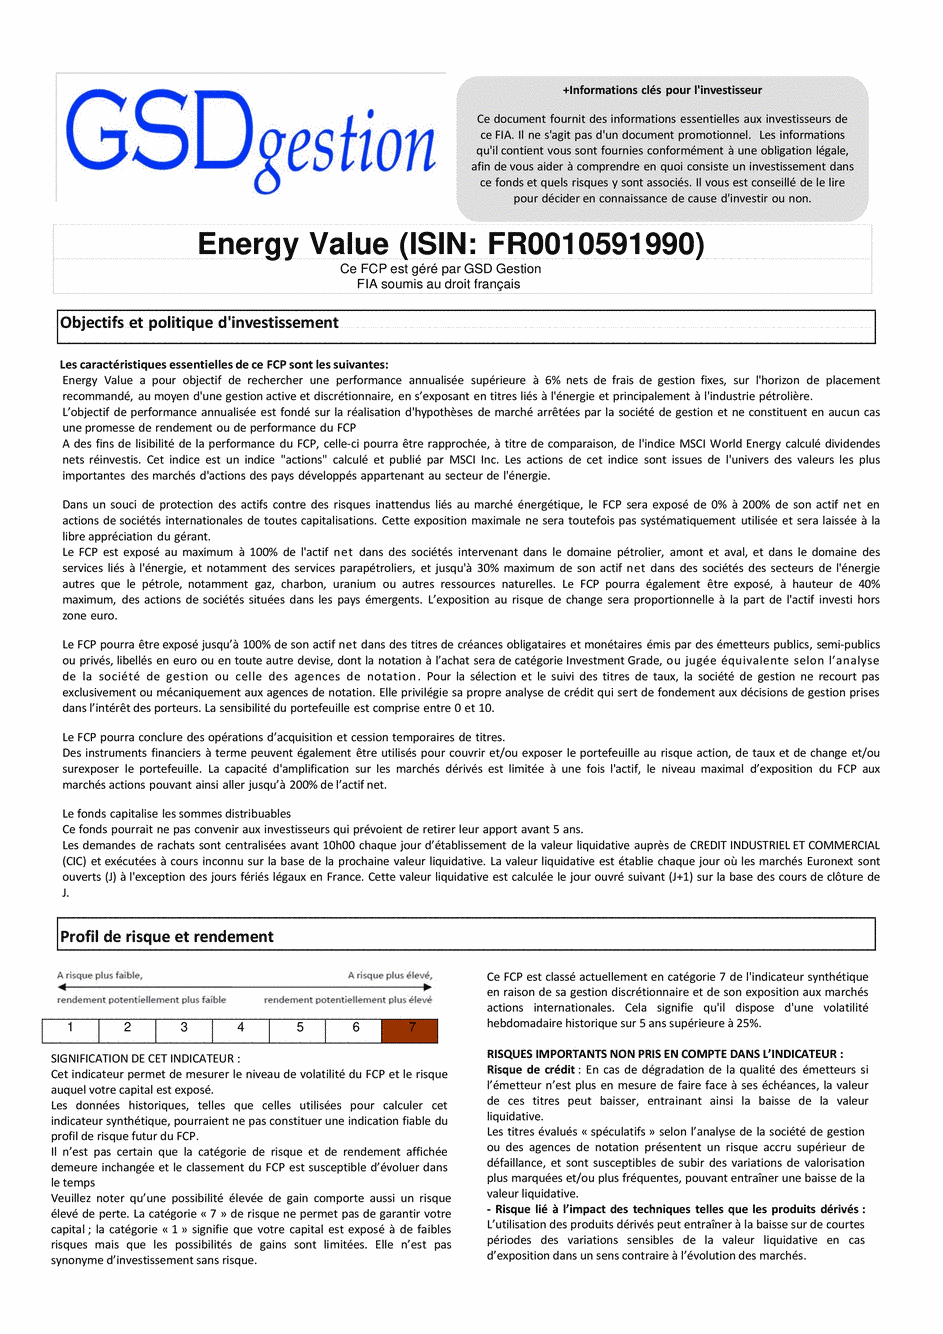 DICI-Prospectus Complet Energy Value - 01/04/2019 - undefined